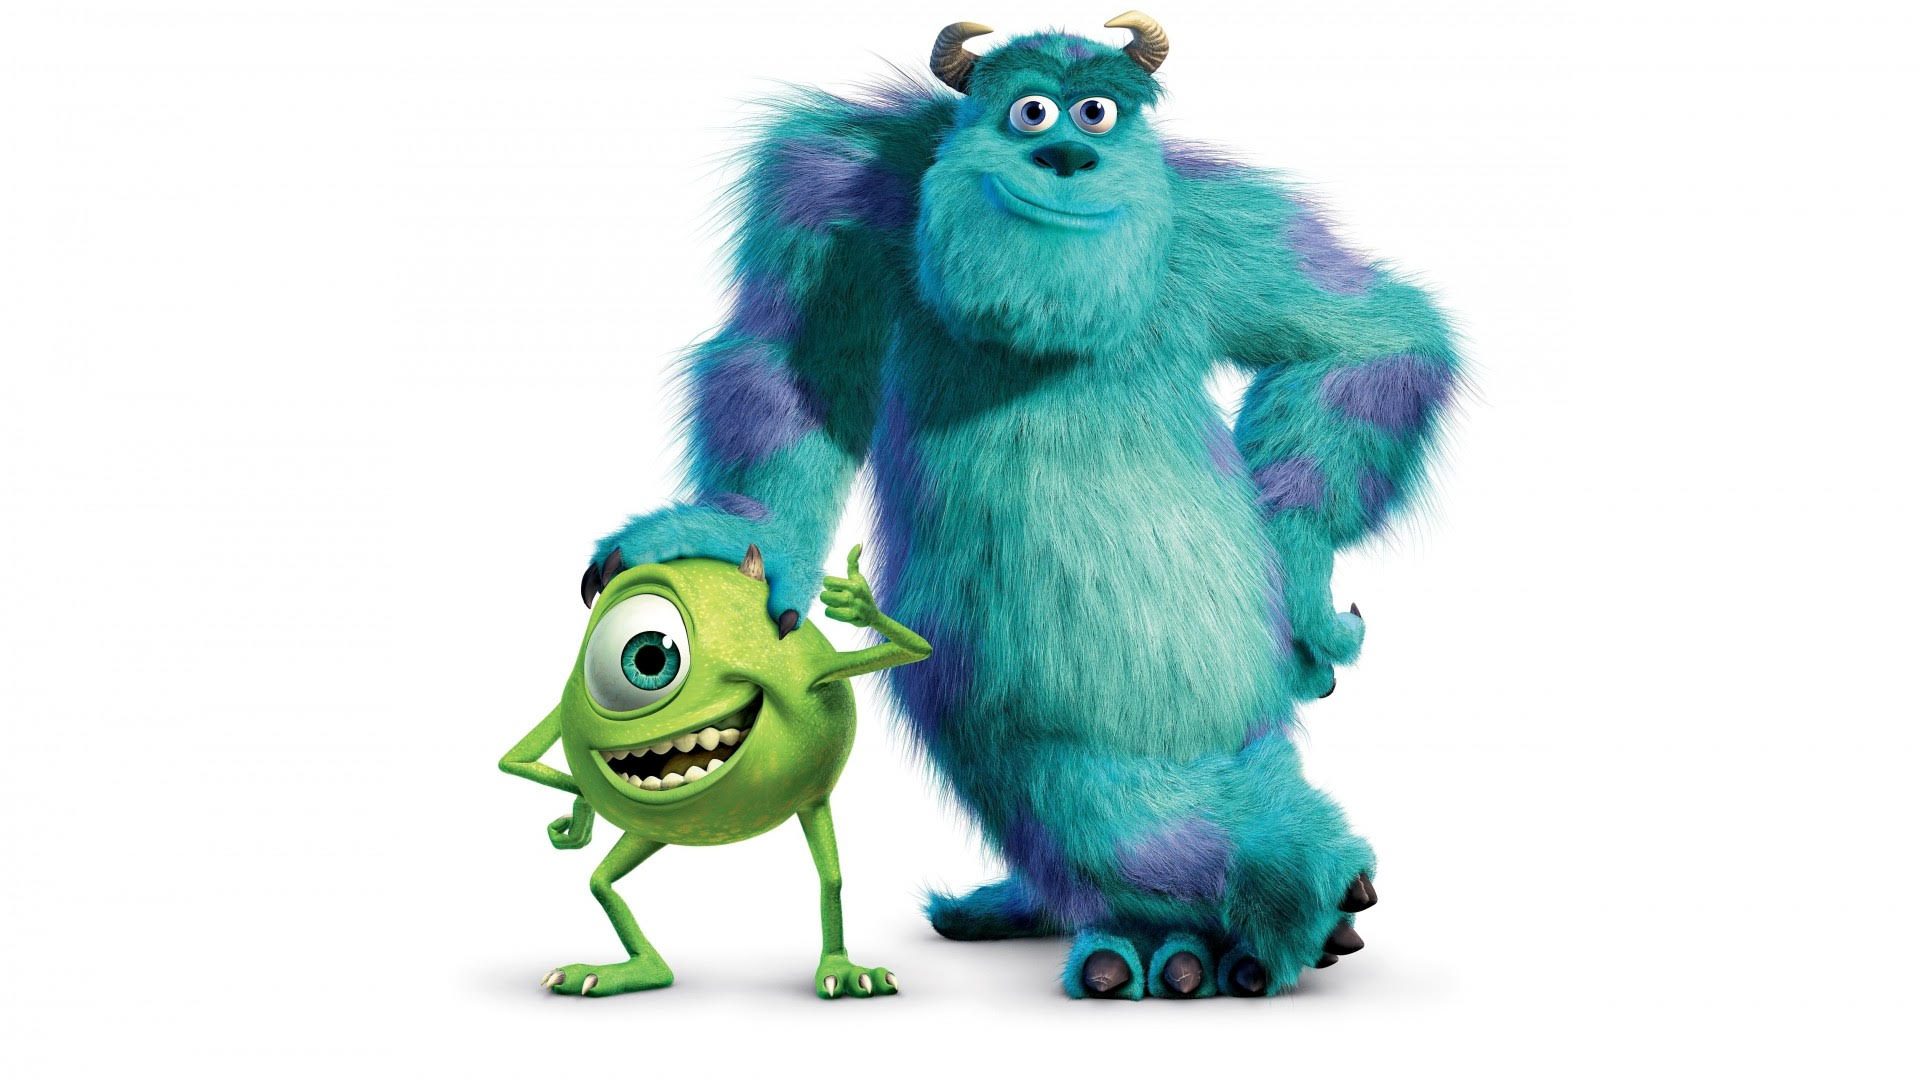 sully-mike-diy-costume-monsters-inc-couples-3